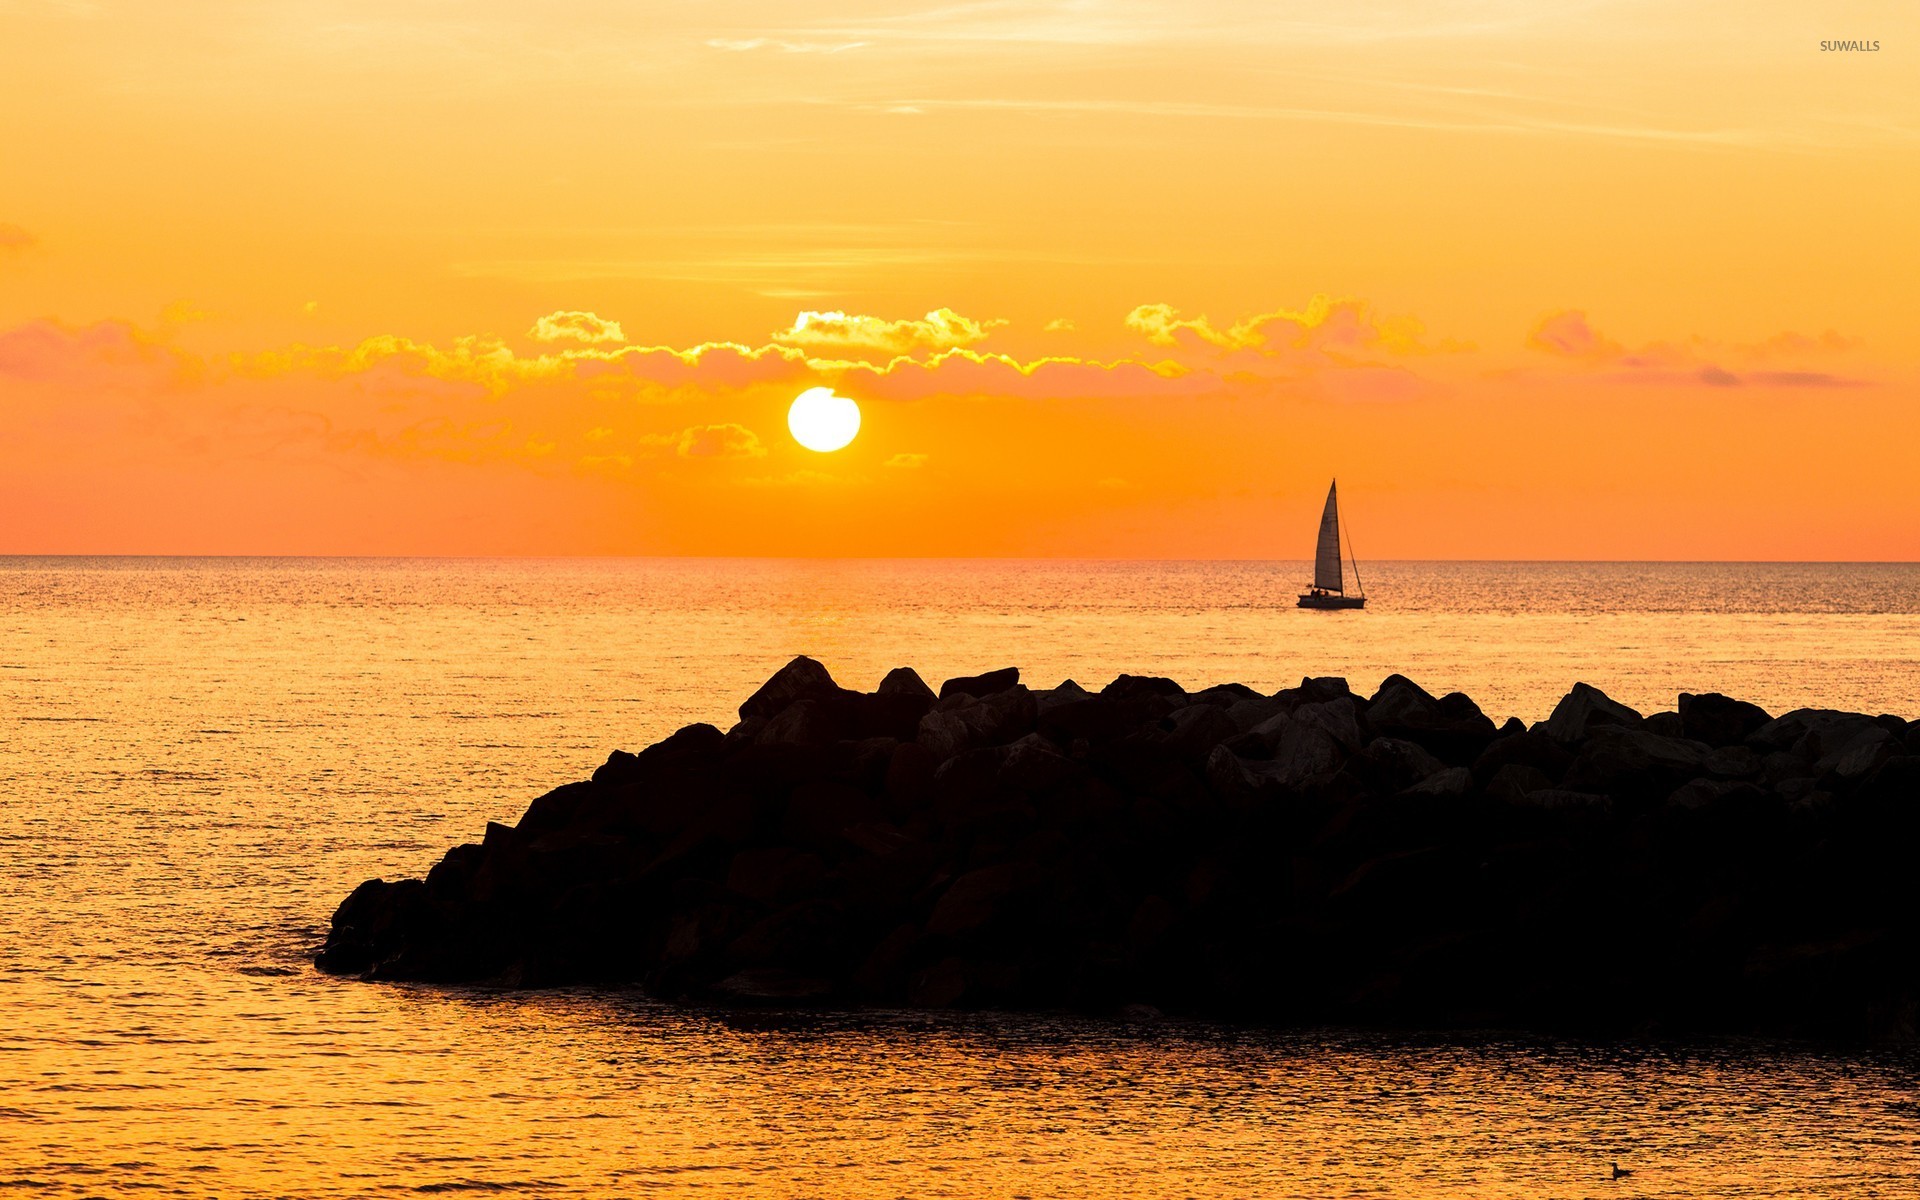 Sailboat in the sunset wallpaper - Photography wallpapers - #22034